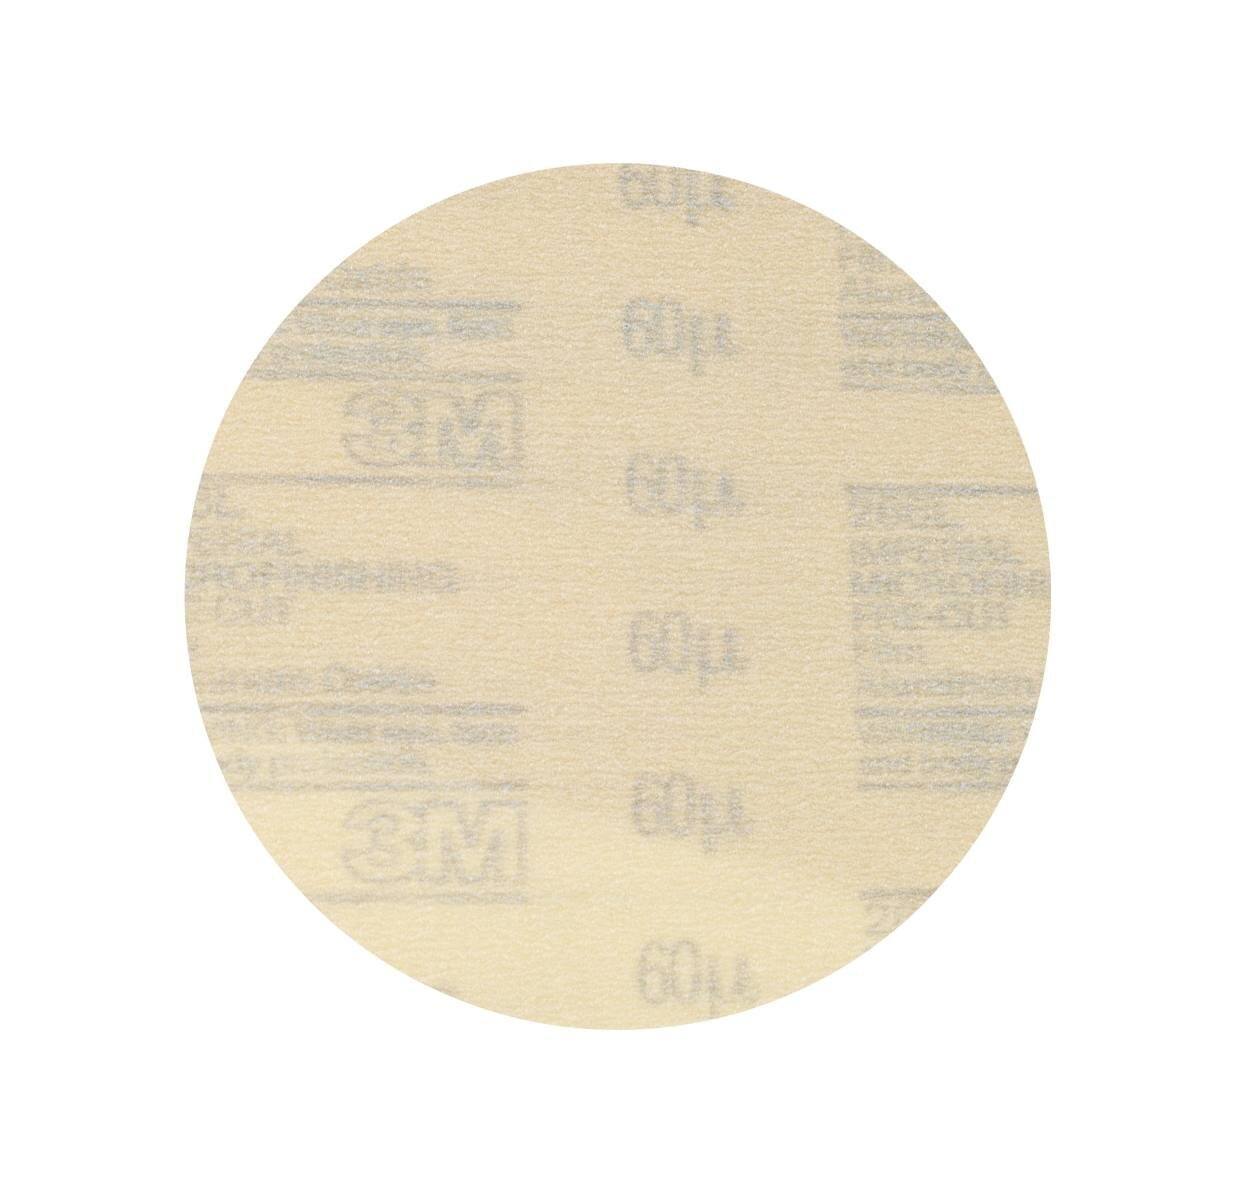 3M Hookit Velcro-backed microfinishing film disc 266L, 150 mm, unpunched, 60 microns #00050